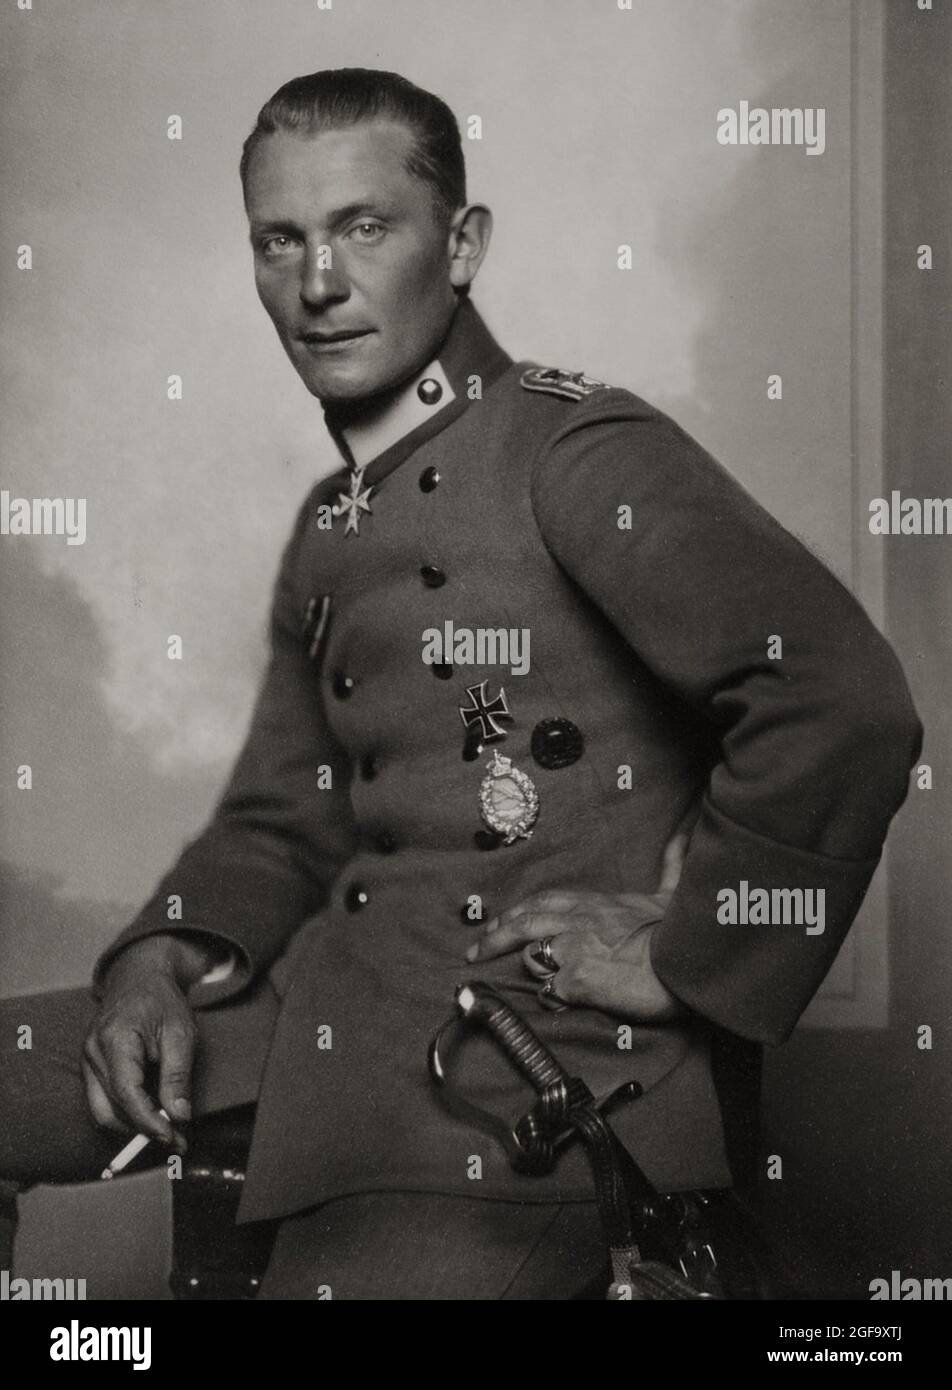 A 1918 portrait of Nazi head of the Luftwaffe Germann Göring as a WW1 fighter pilot. He was captured in 1945, tried and condemned to death at Nuremberg in 1946. He committed suicide hours before he was due to be hanged. Stock Photo